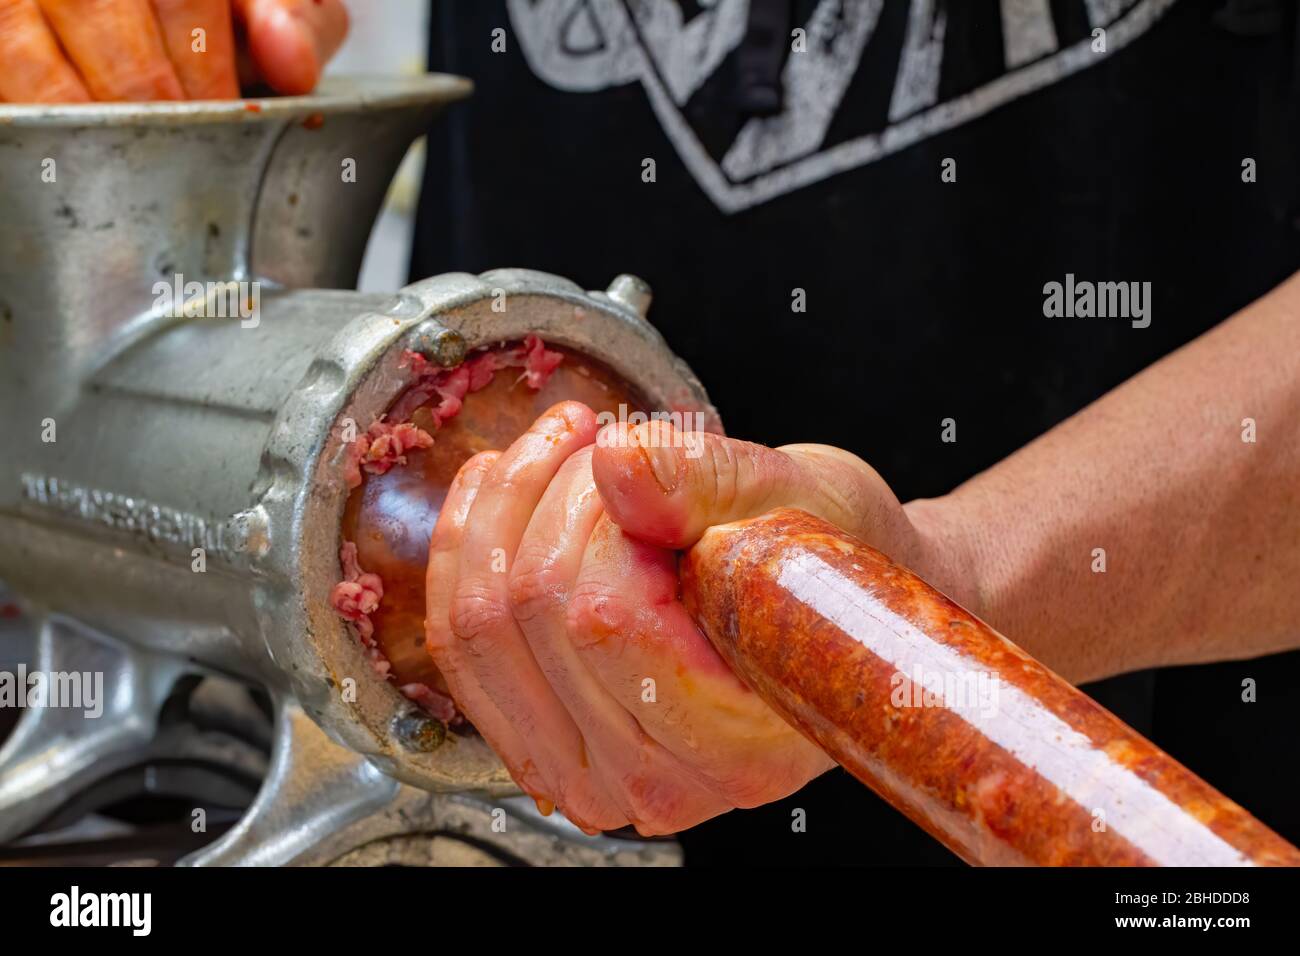 Mincing pork into casing  to make dried Italian Sausages Stock Photo